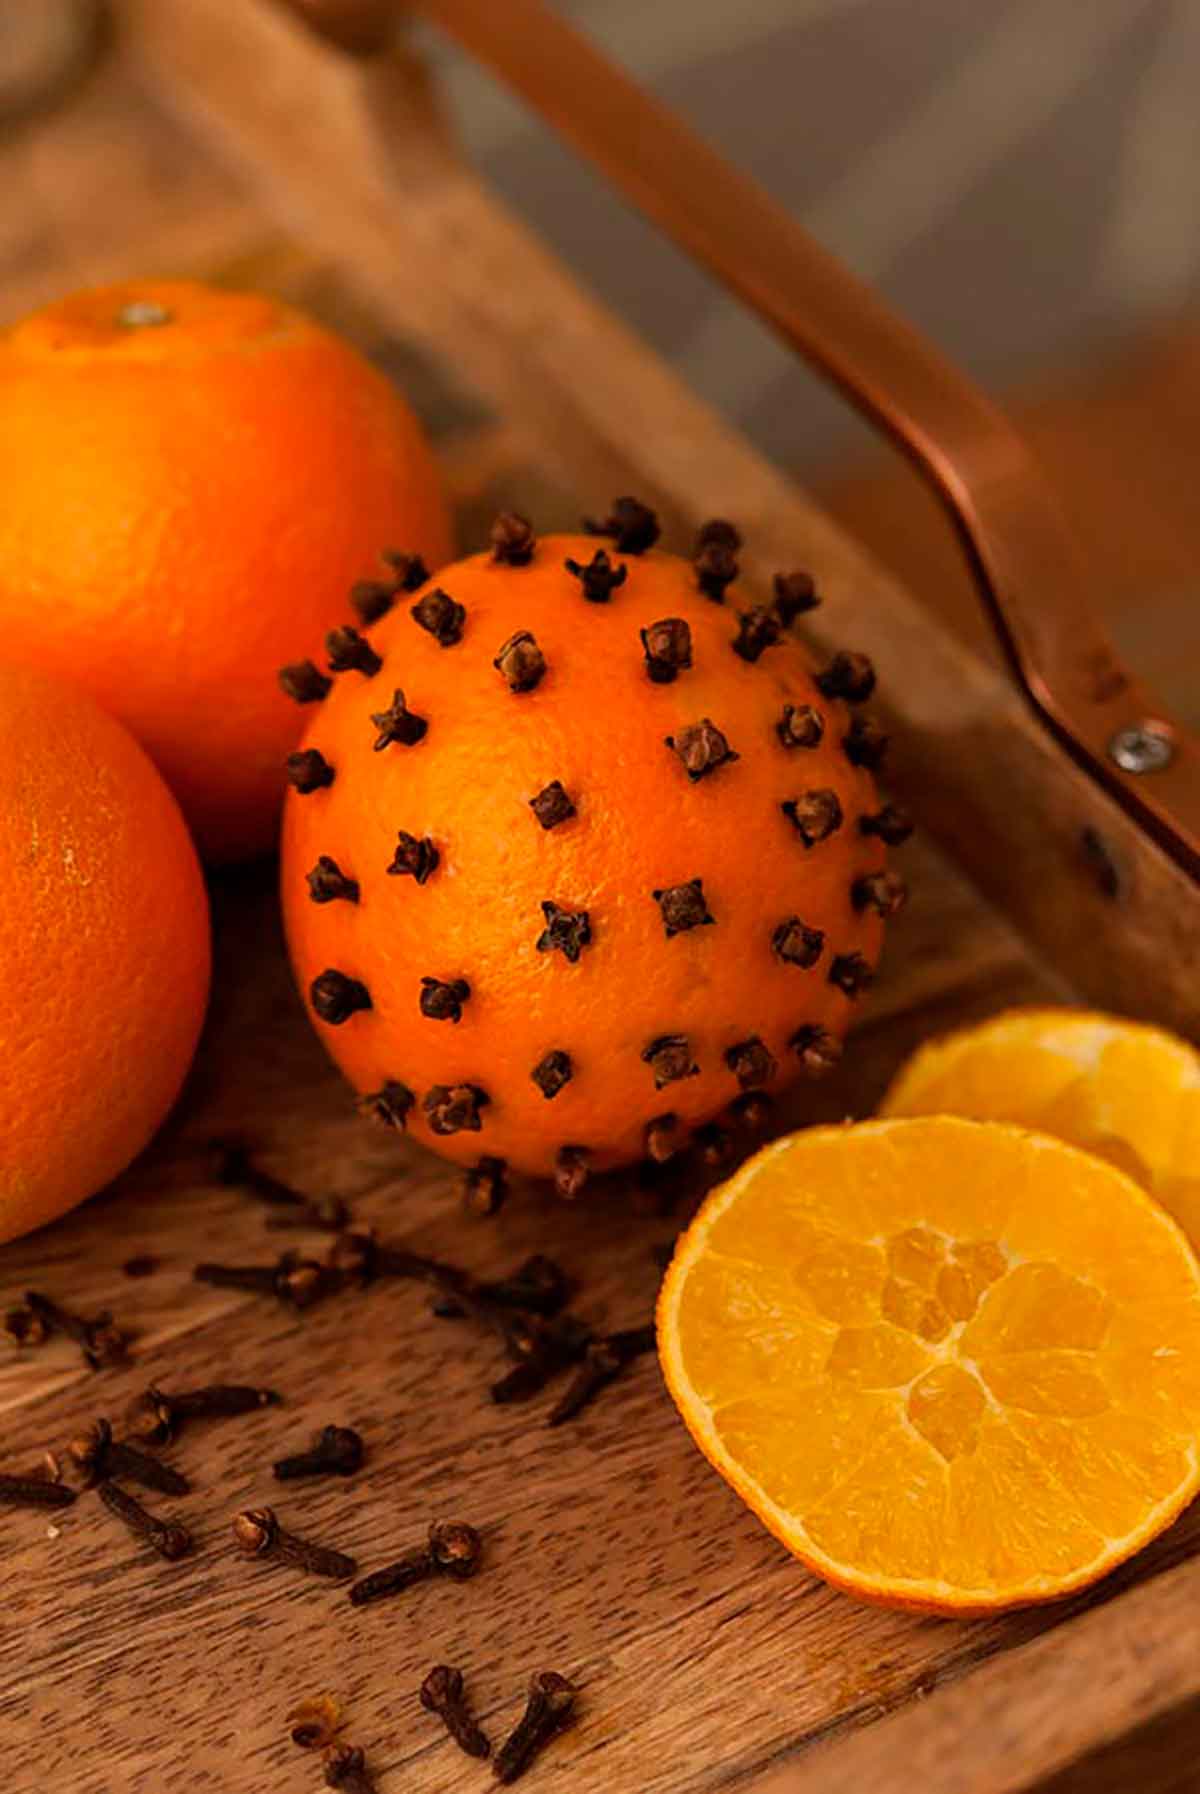 An orange with cloves stuck evenly into it on a wooden tray, surrounded by a 2 more oranges and 2 orange slices.